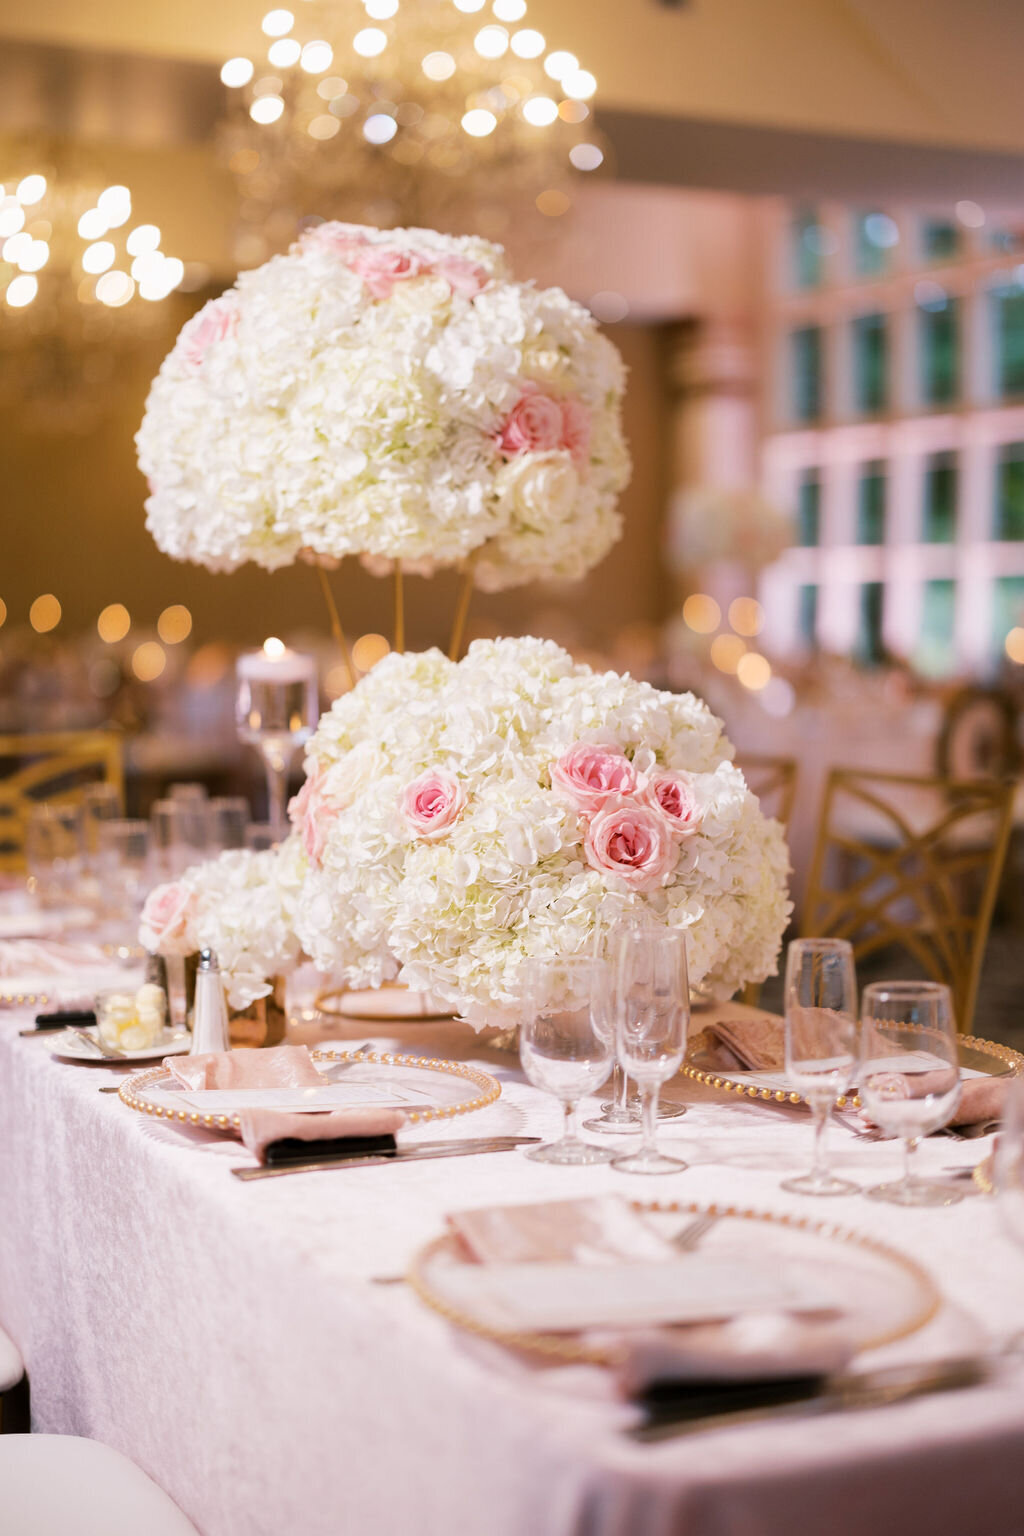 table setting with pink and white florals, elegant glasses, and glass plates with gold accents